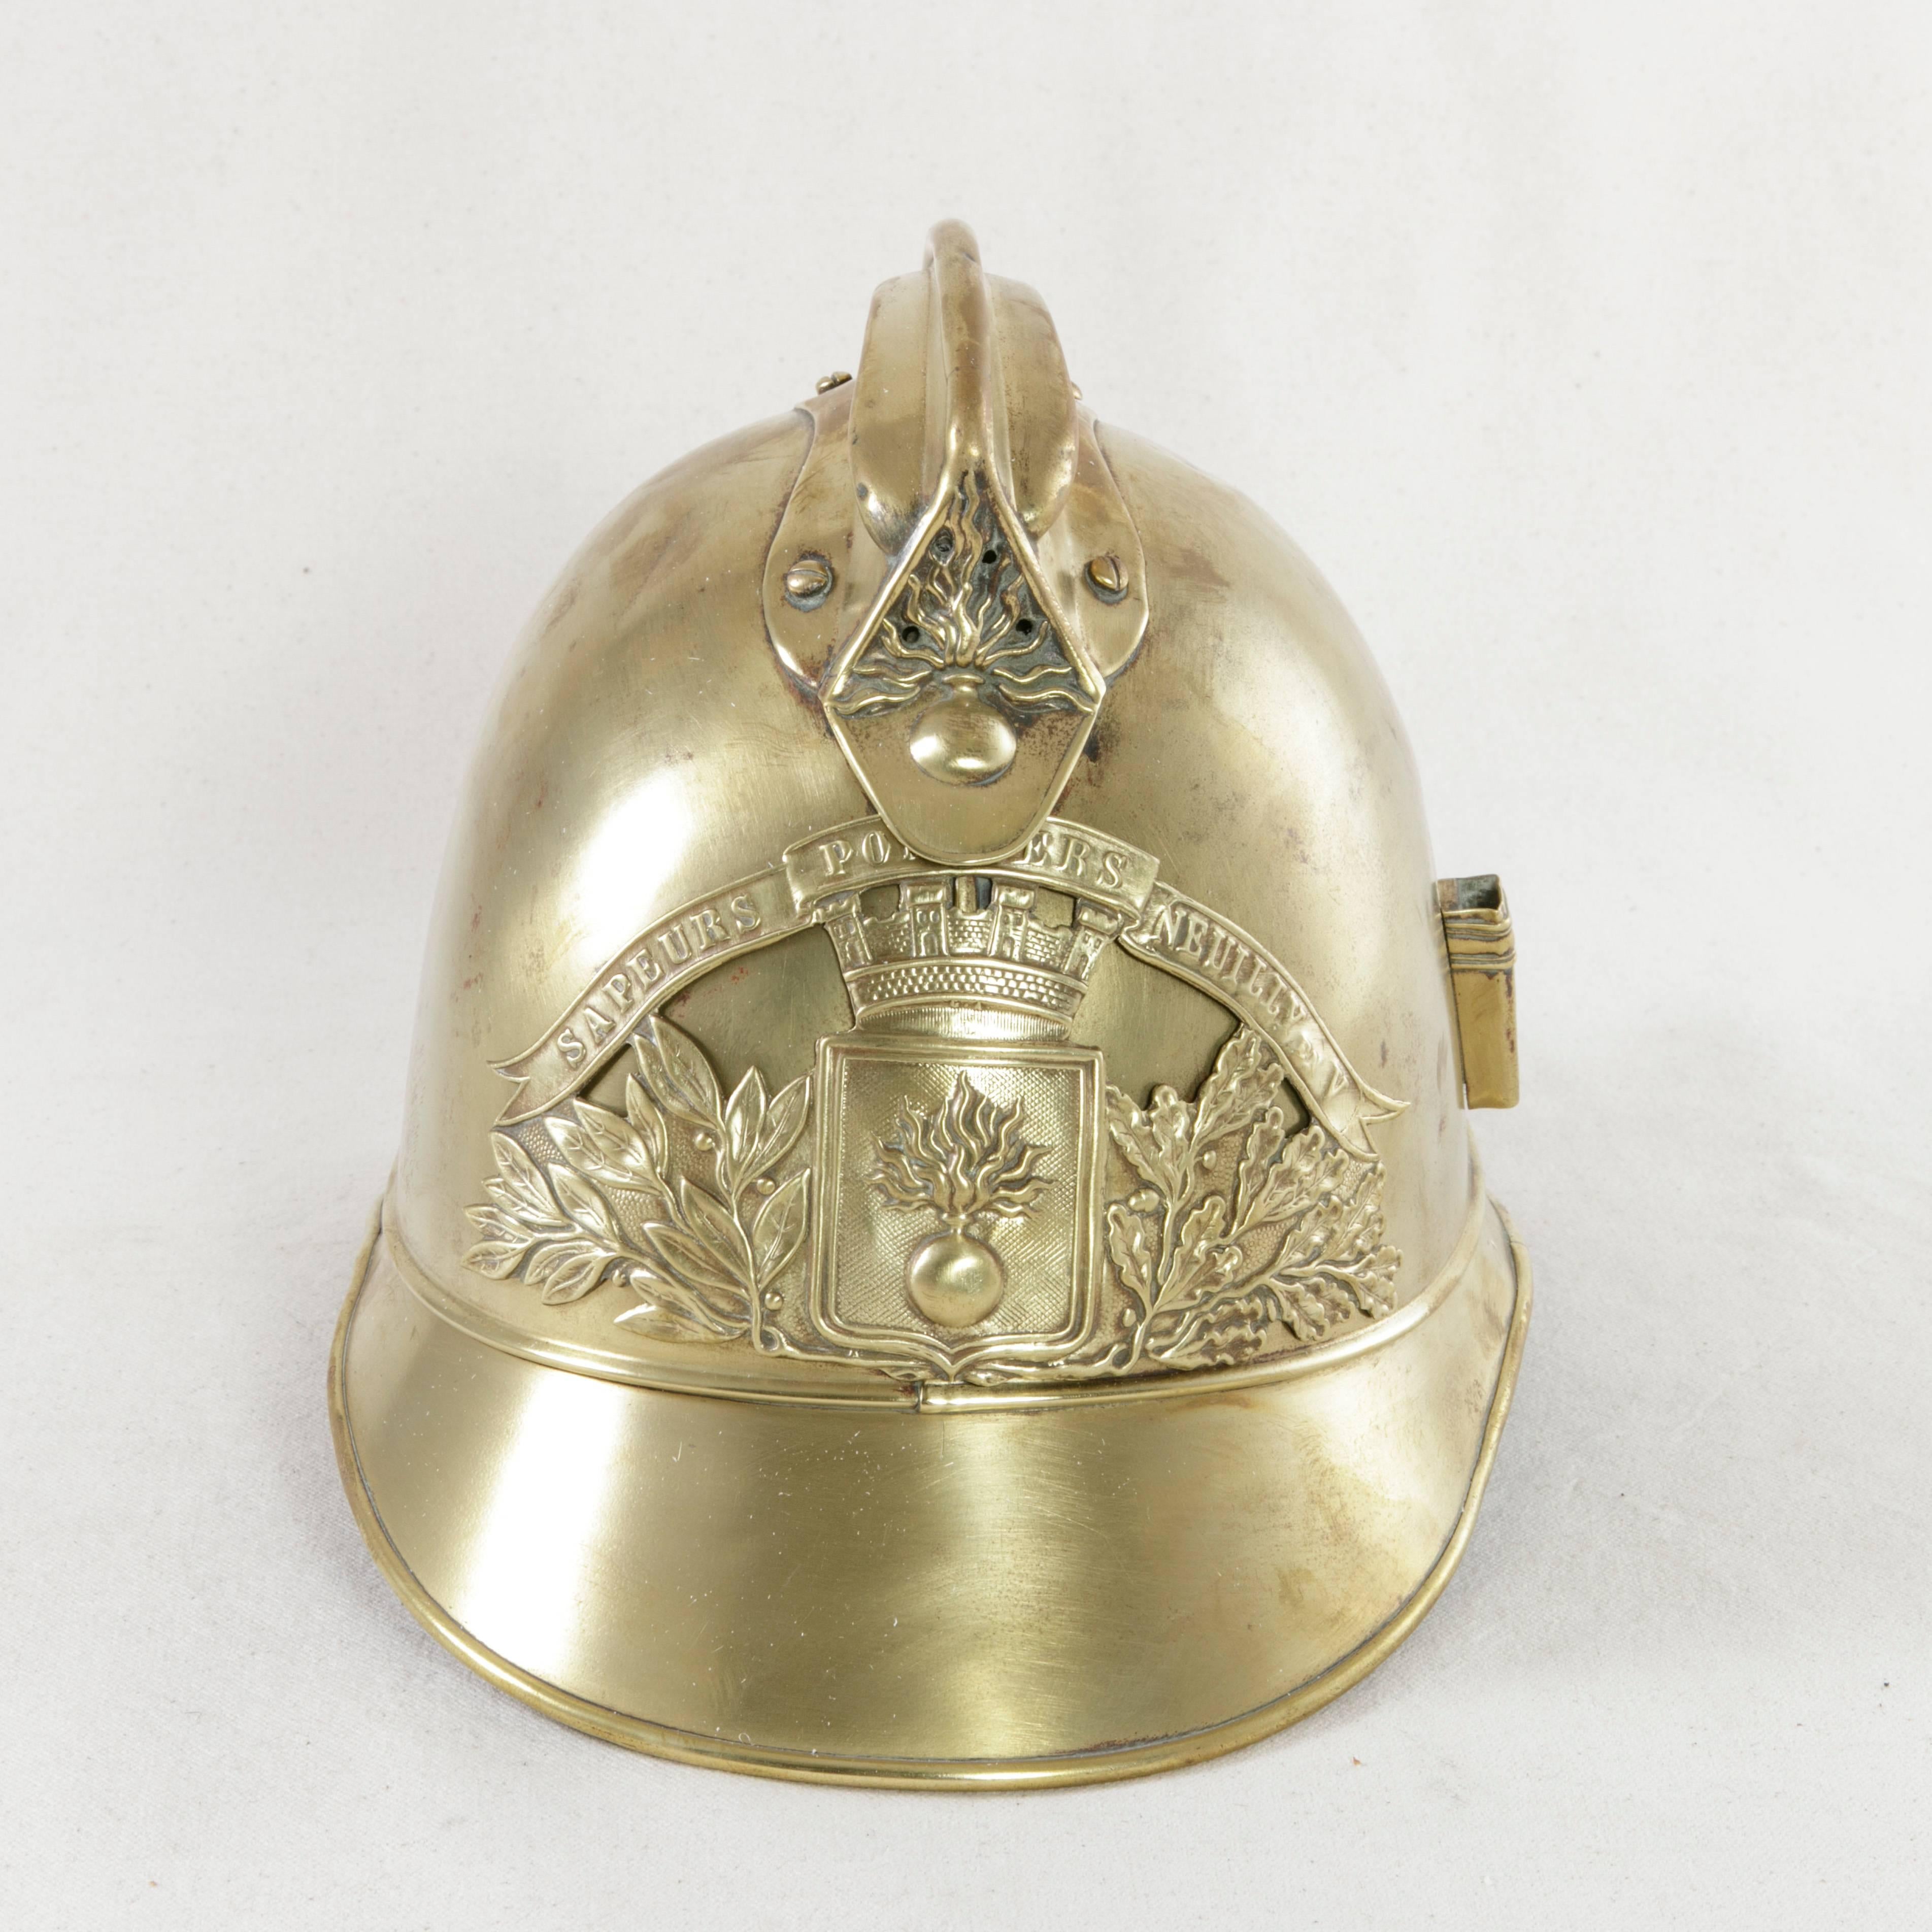 Fitted with its original leather chin strap, this French brass fireman's helmet takes the form of a French military helmet, a style frequently seen during the First World War. The front plate of the helmet bears the classic French fireman symbol of